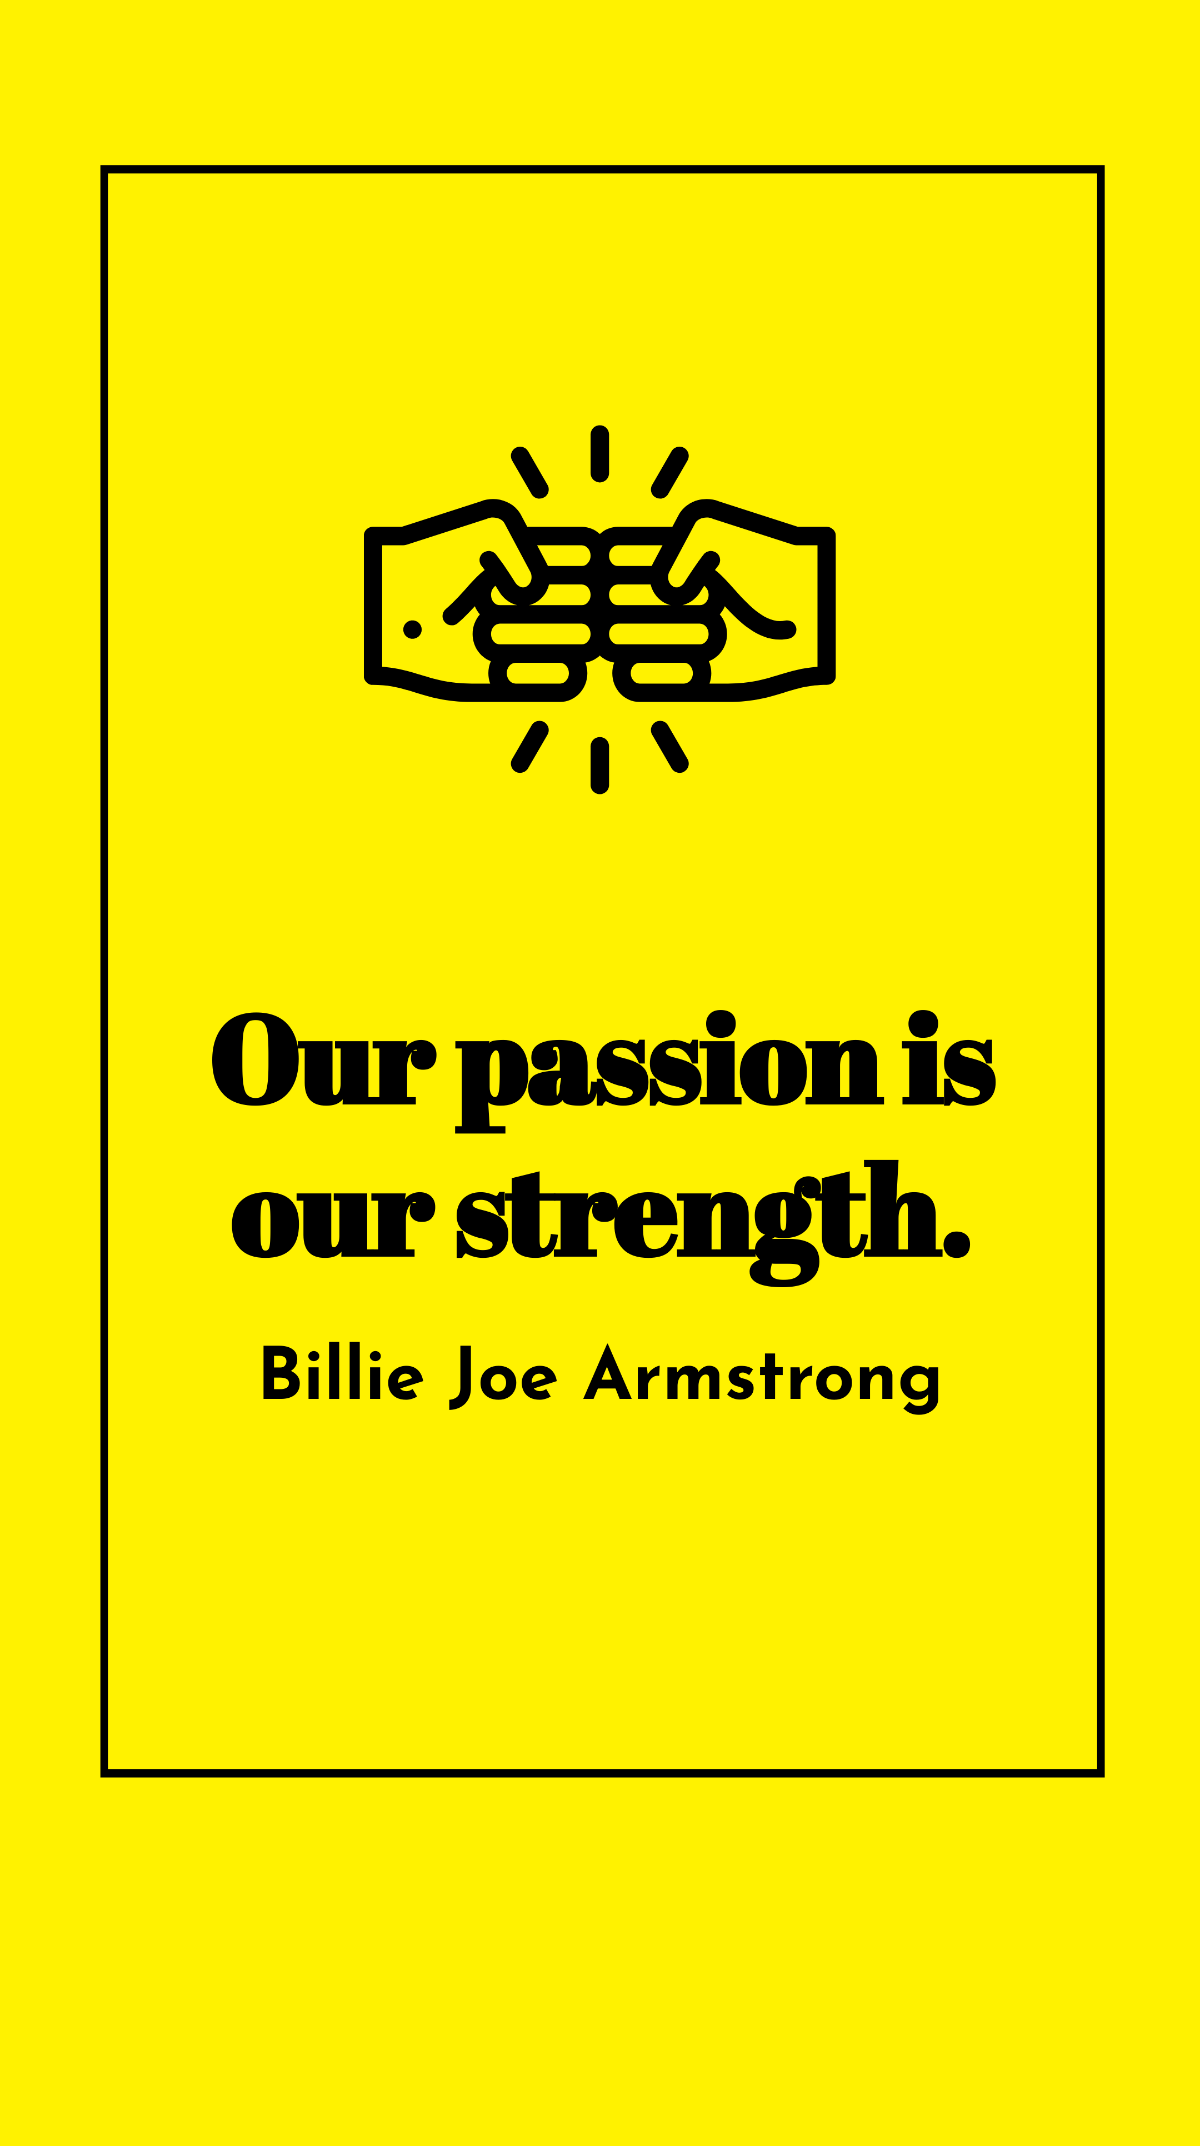 Billie Joe Armstrong - Our passion is our strength.  Template